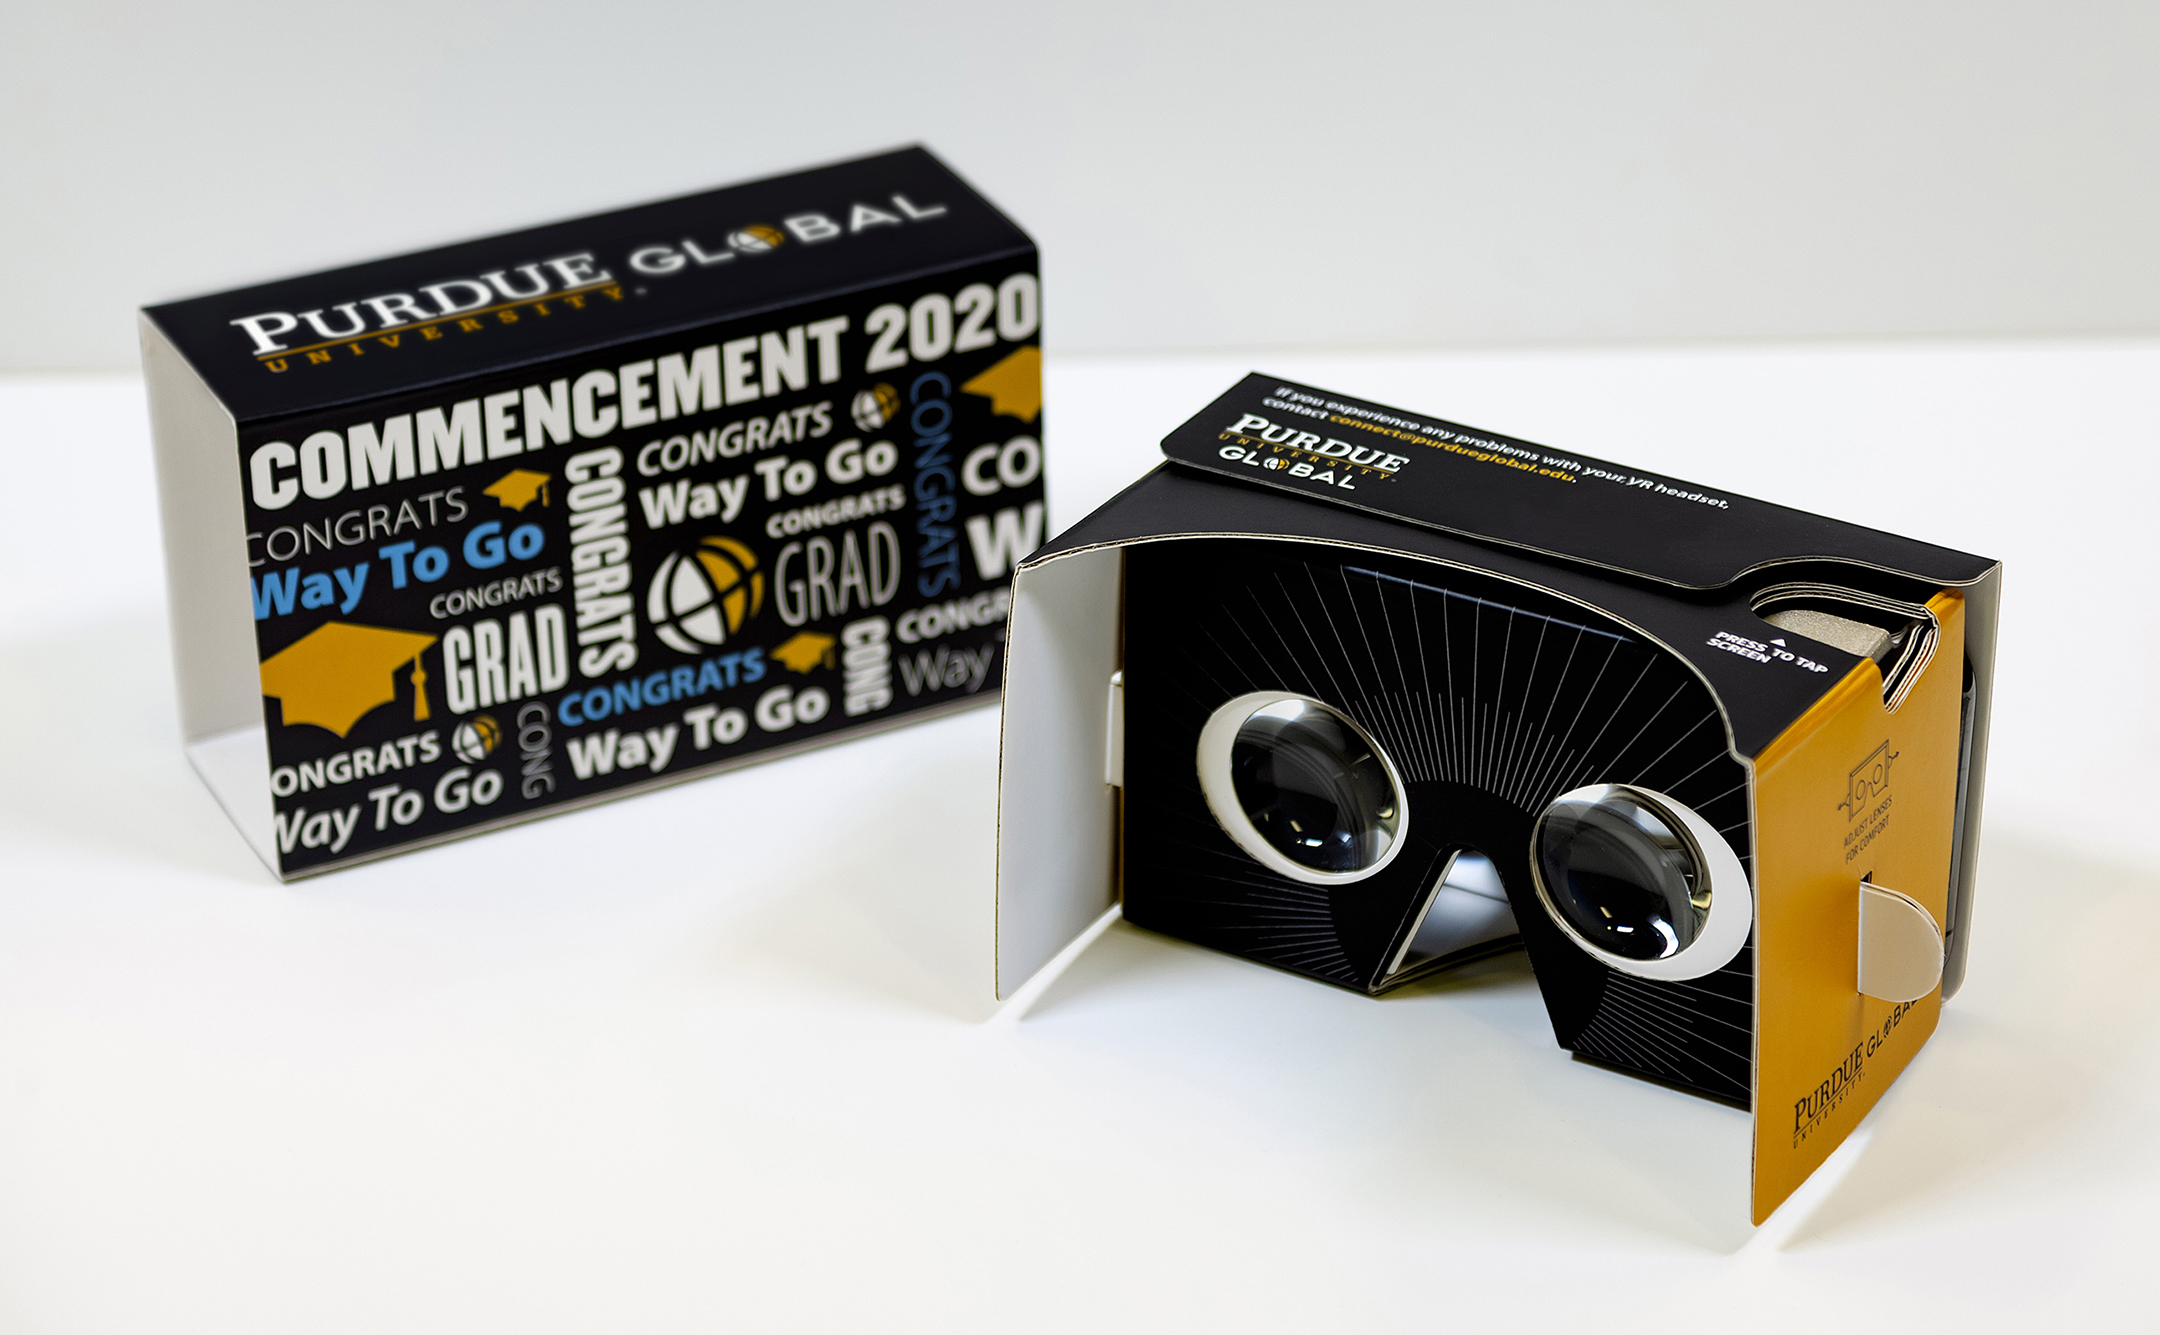 Examples of VR headsets that Perdue planned to distribute to more than 75 Purdue University Global graduates so they could participate in their commencement ceremony virtually. 